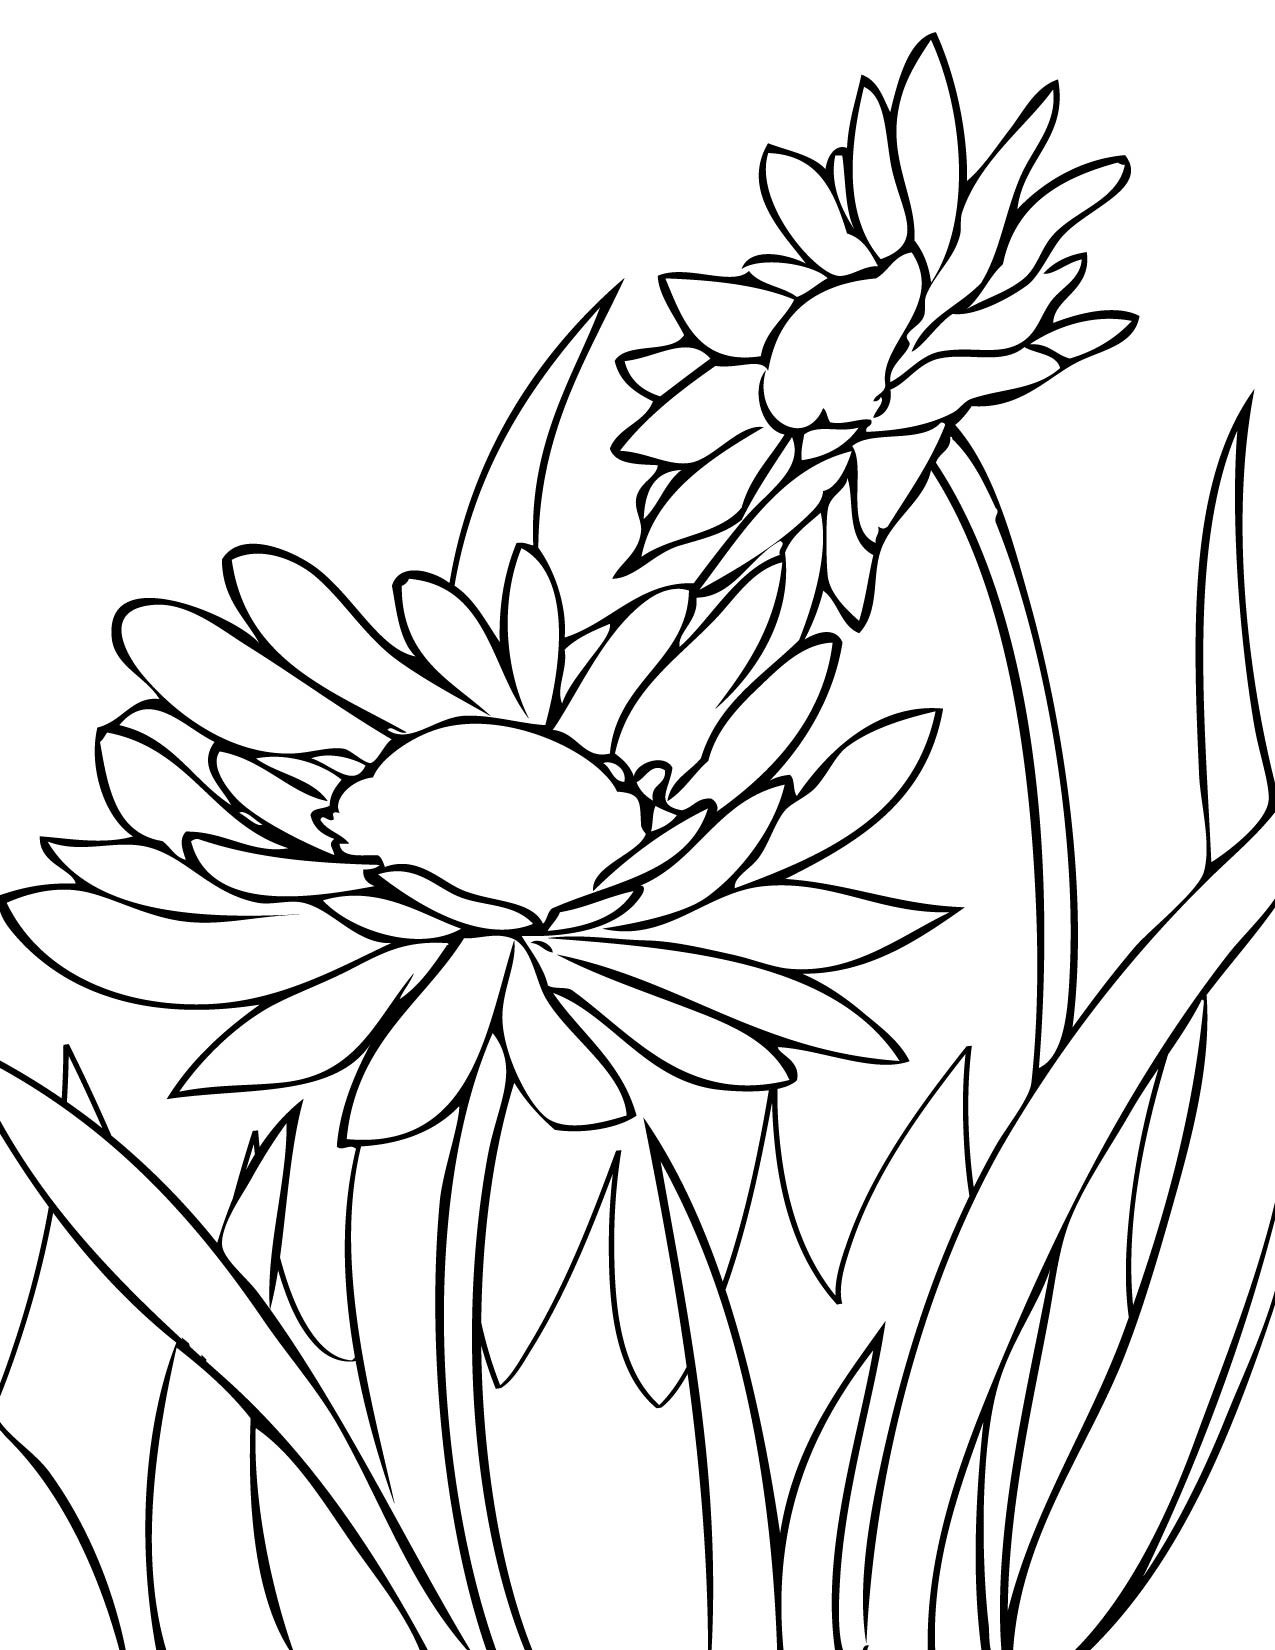 Daisy Coloring Pages - Best Coloring Pages For Kids